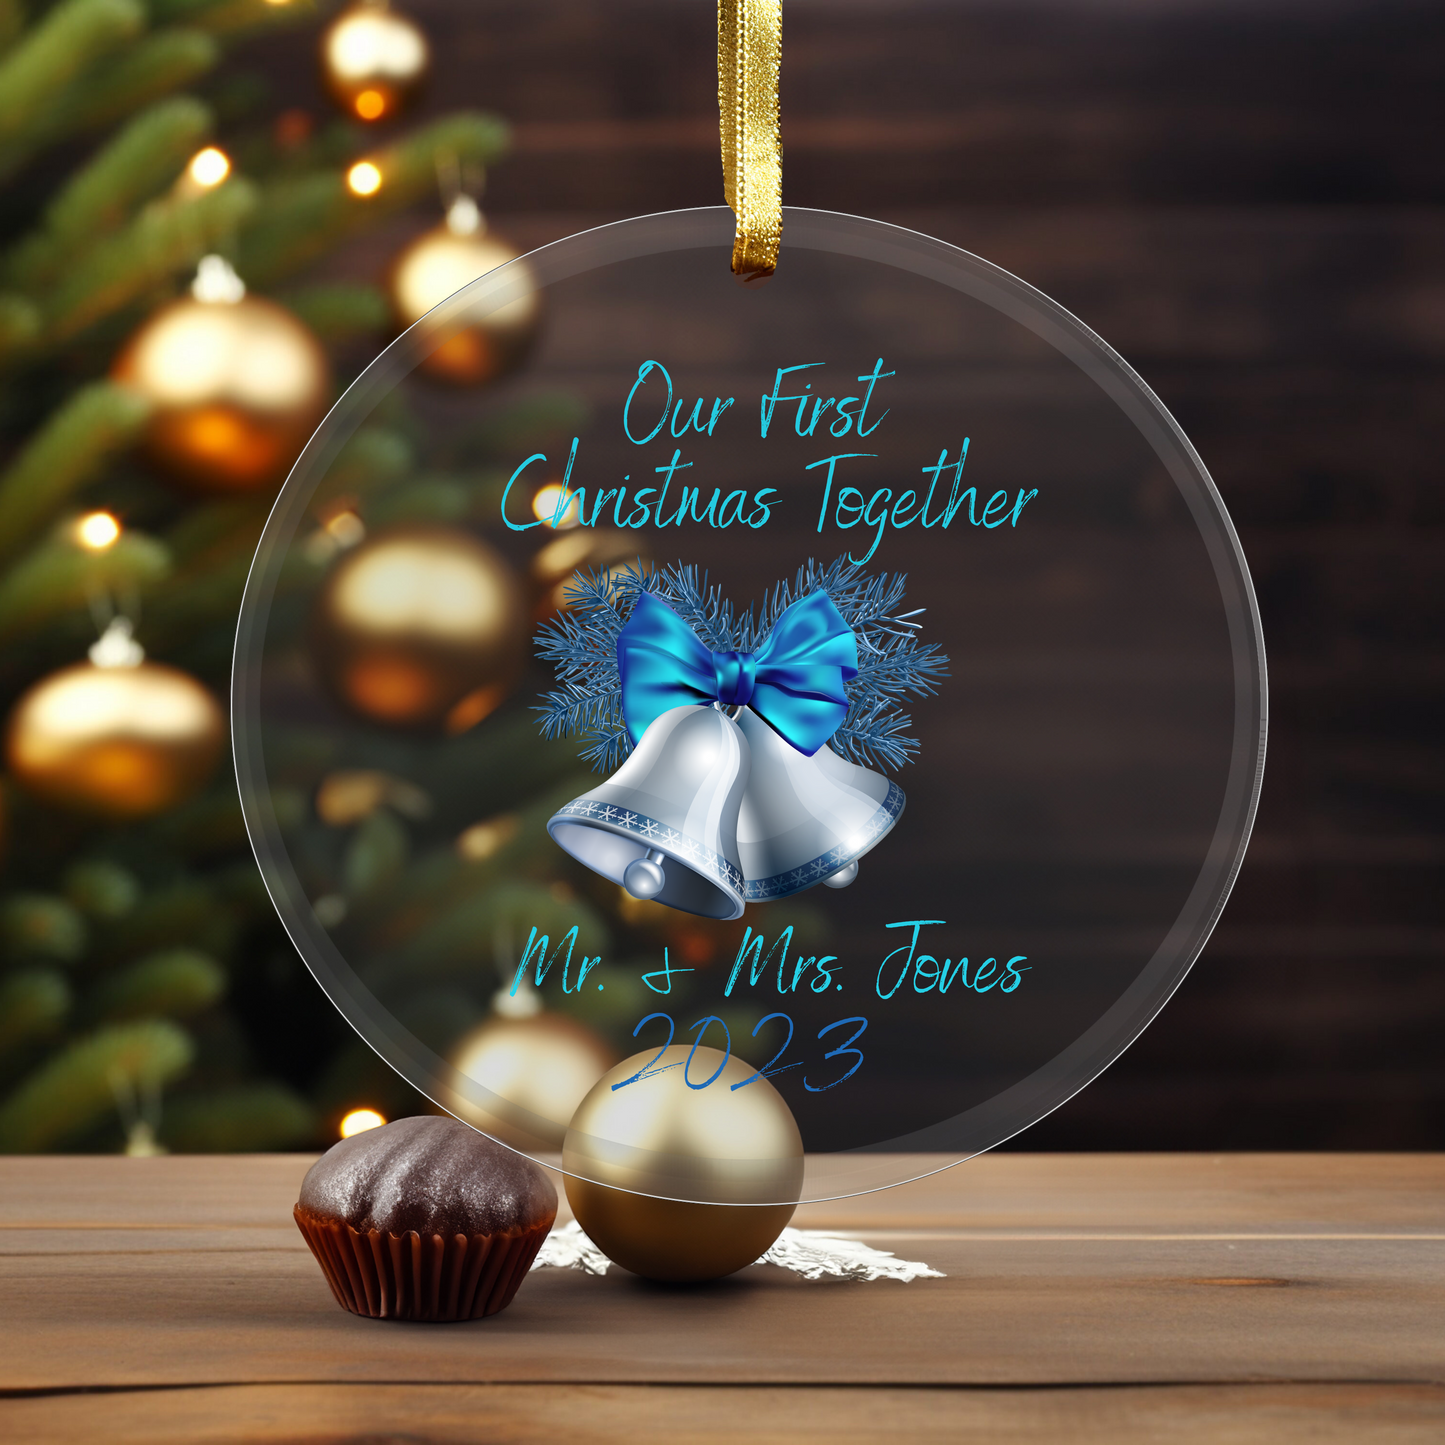 Personalized "Our First Christmas Together" Ornament